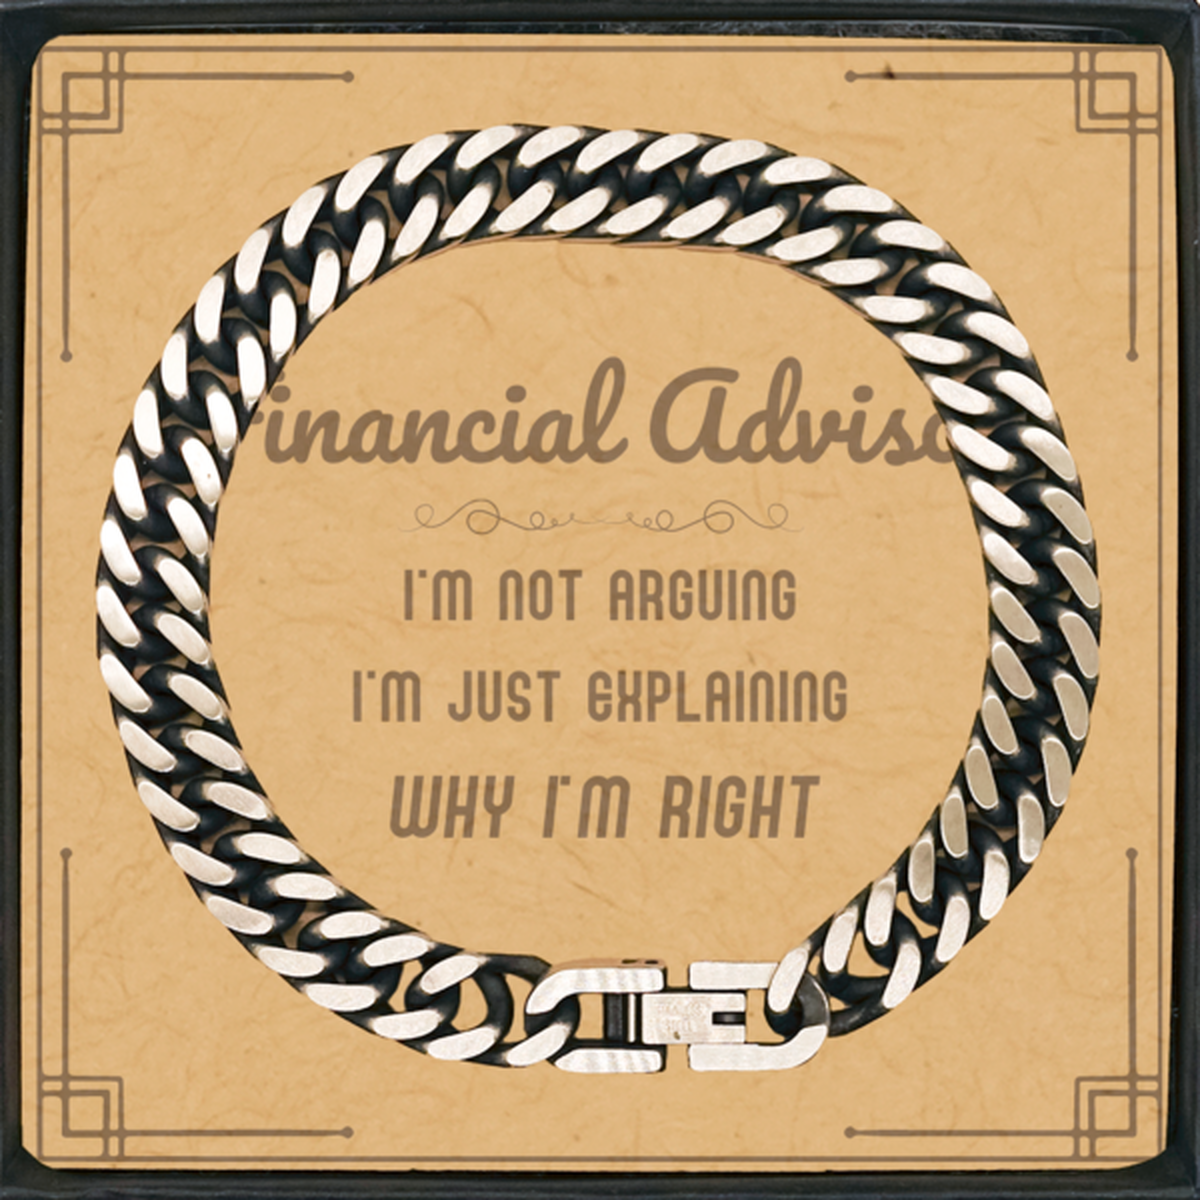 Financial Advisor I'm not Arguing. I'm Just Explaining Why I'm RIGHT Cuban Link Chain Bracelet, Funny Saying Quote Financial Advisor Gifts For Financial Advisor Message Card Graduation Birthday Christmas Gifts for Men Women Coworker